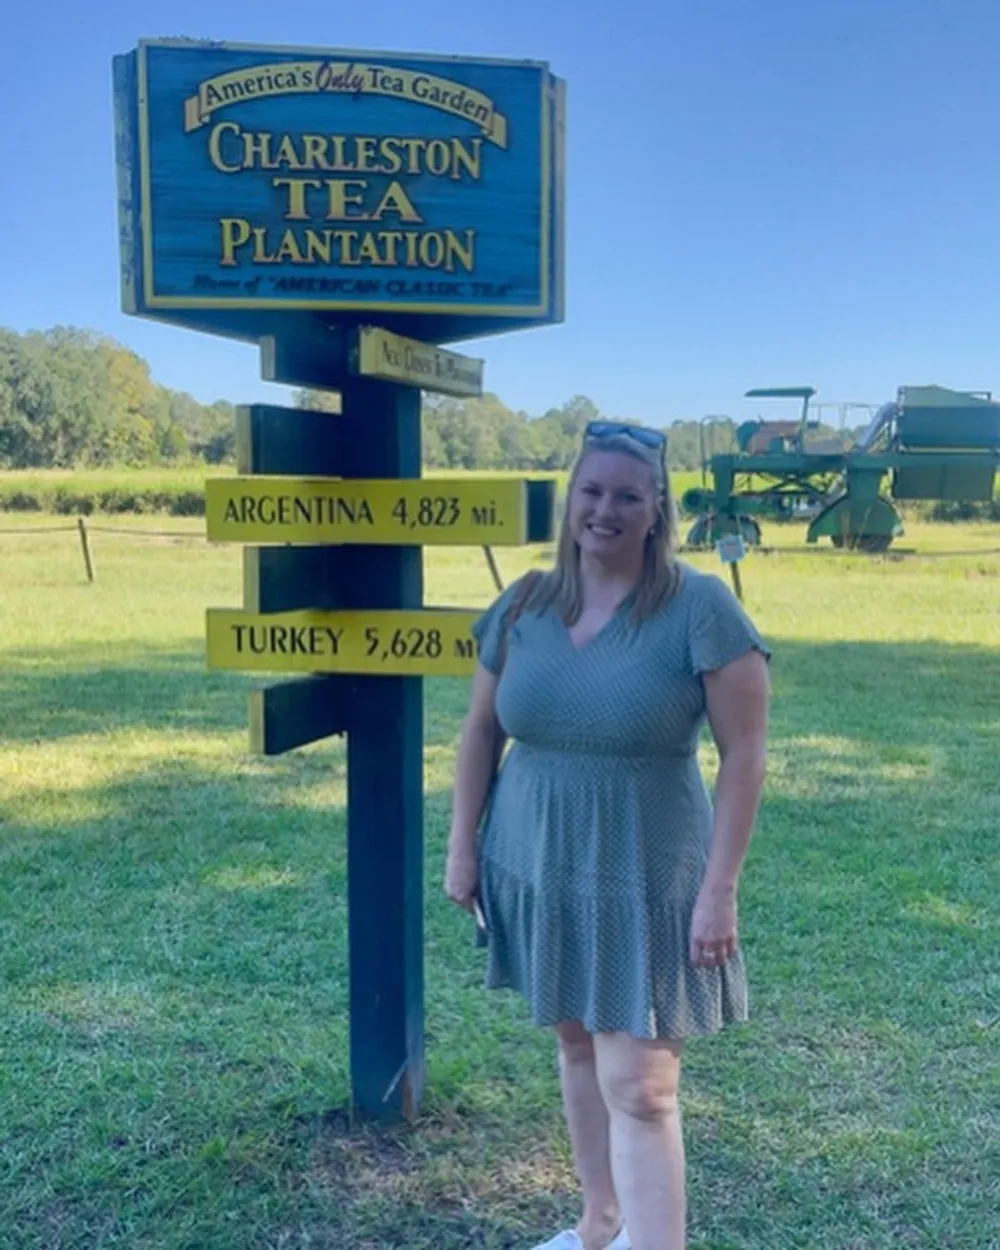 A woman in a dress is standing and smiling next to a blue and yellow sign that reads Charleston Tea Plantation with directional arrows pointing to Argentina and Turkey noting their distances in miles